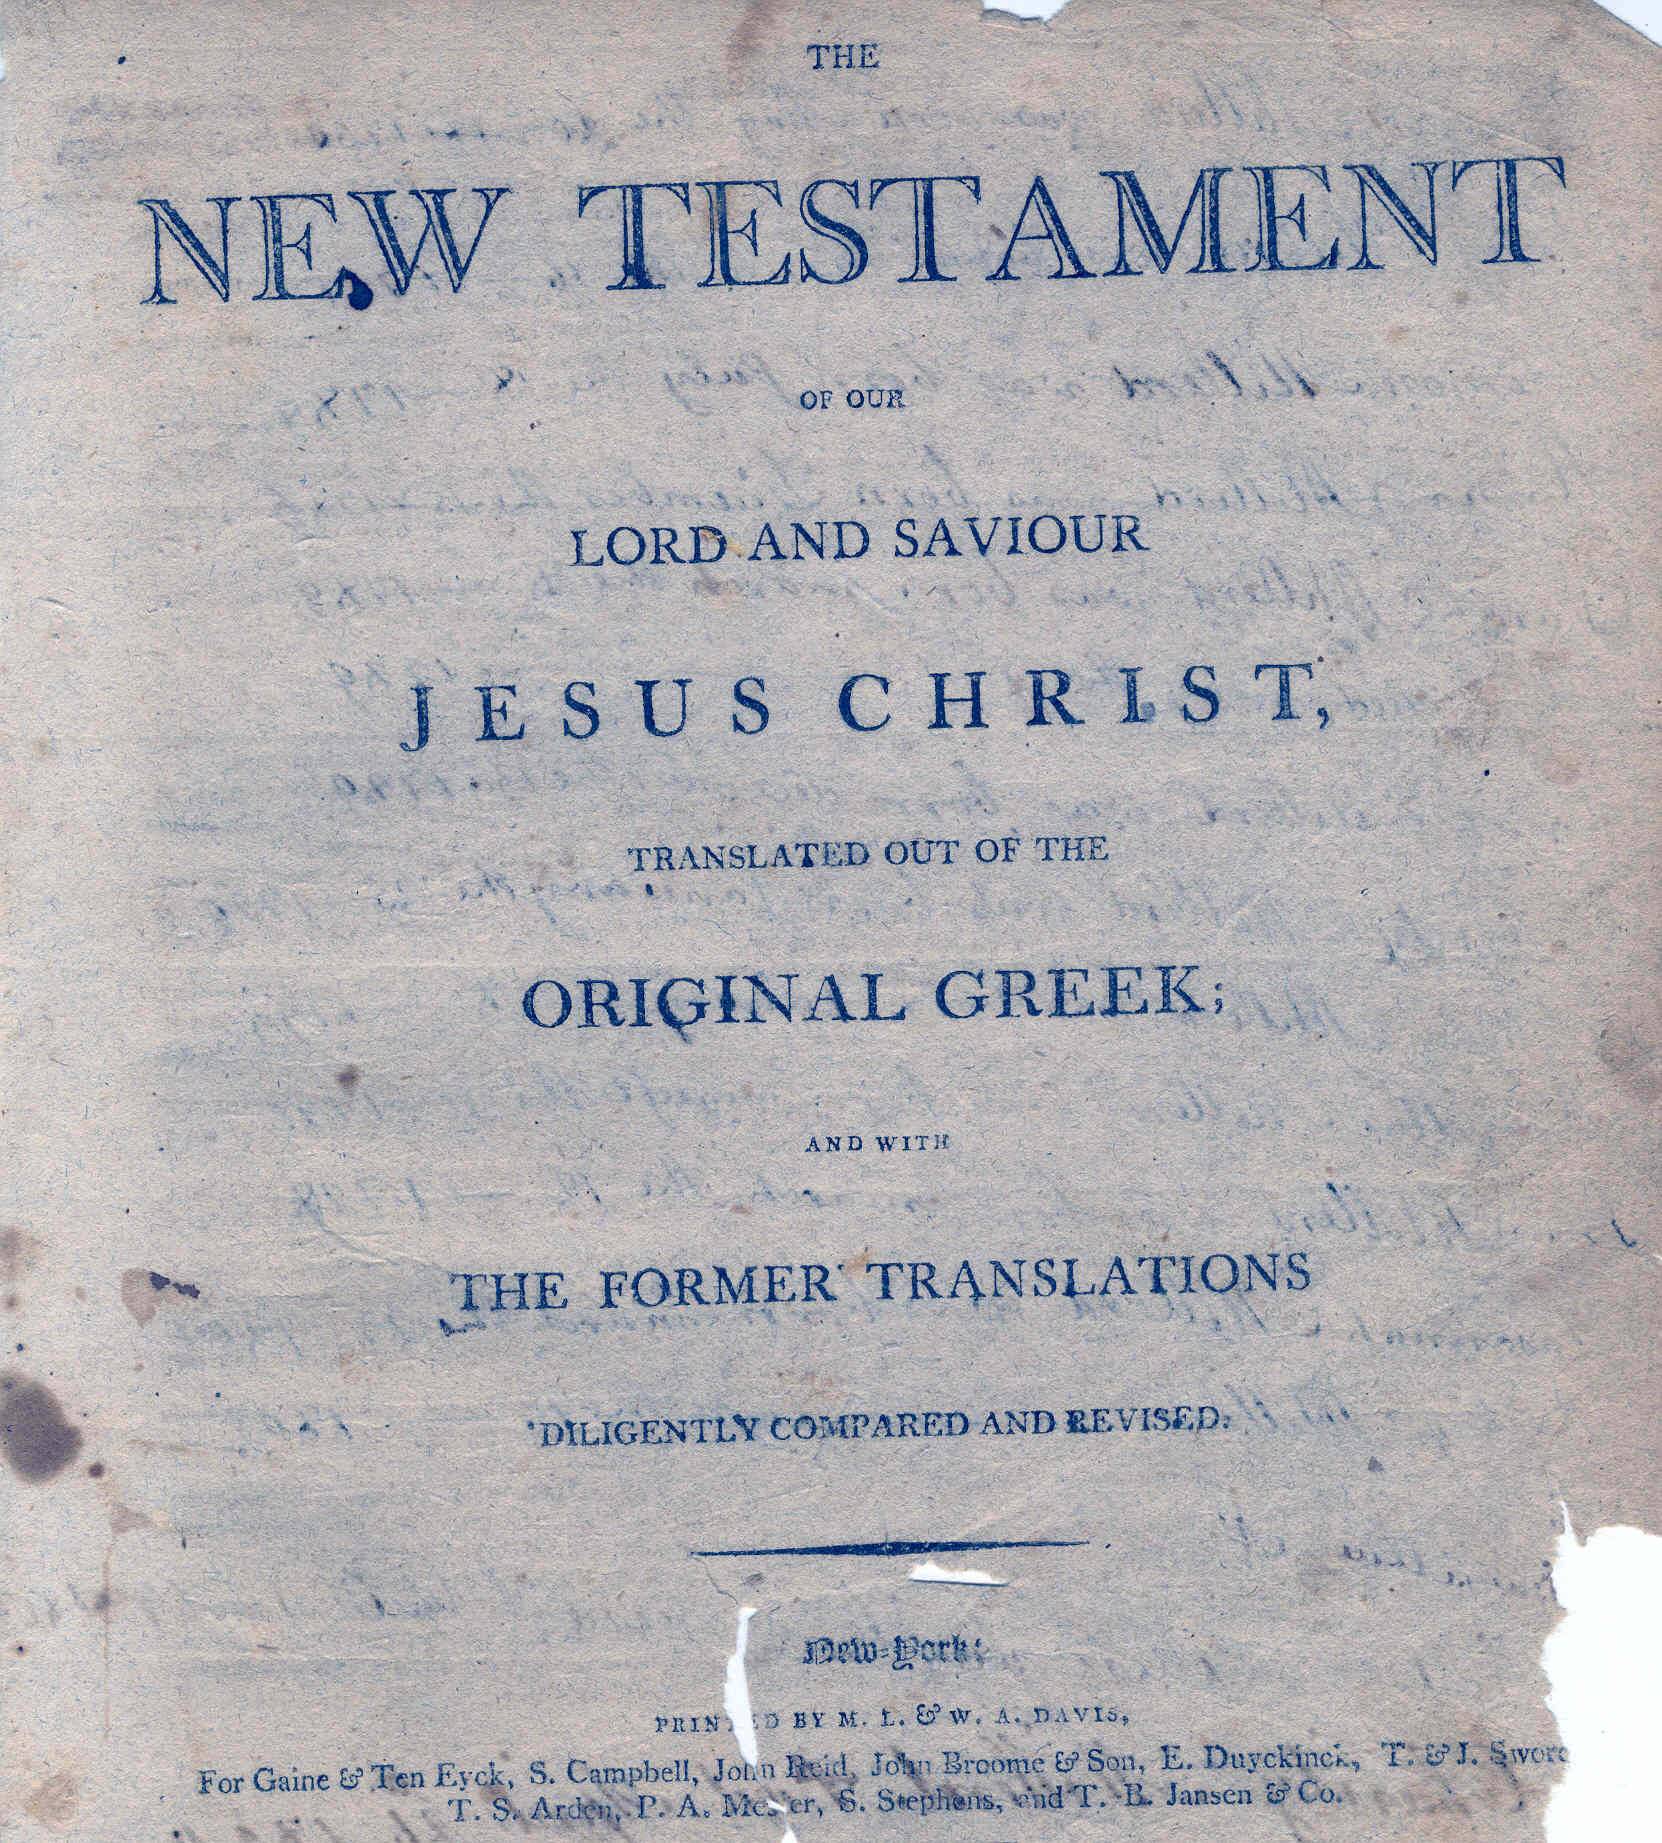 Image of title page of Millerd Bible